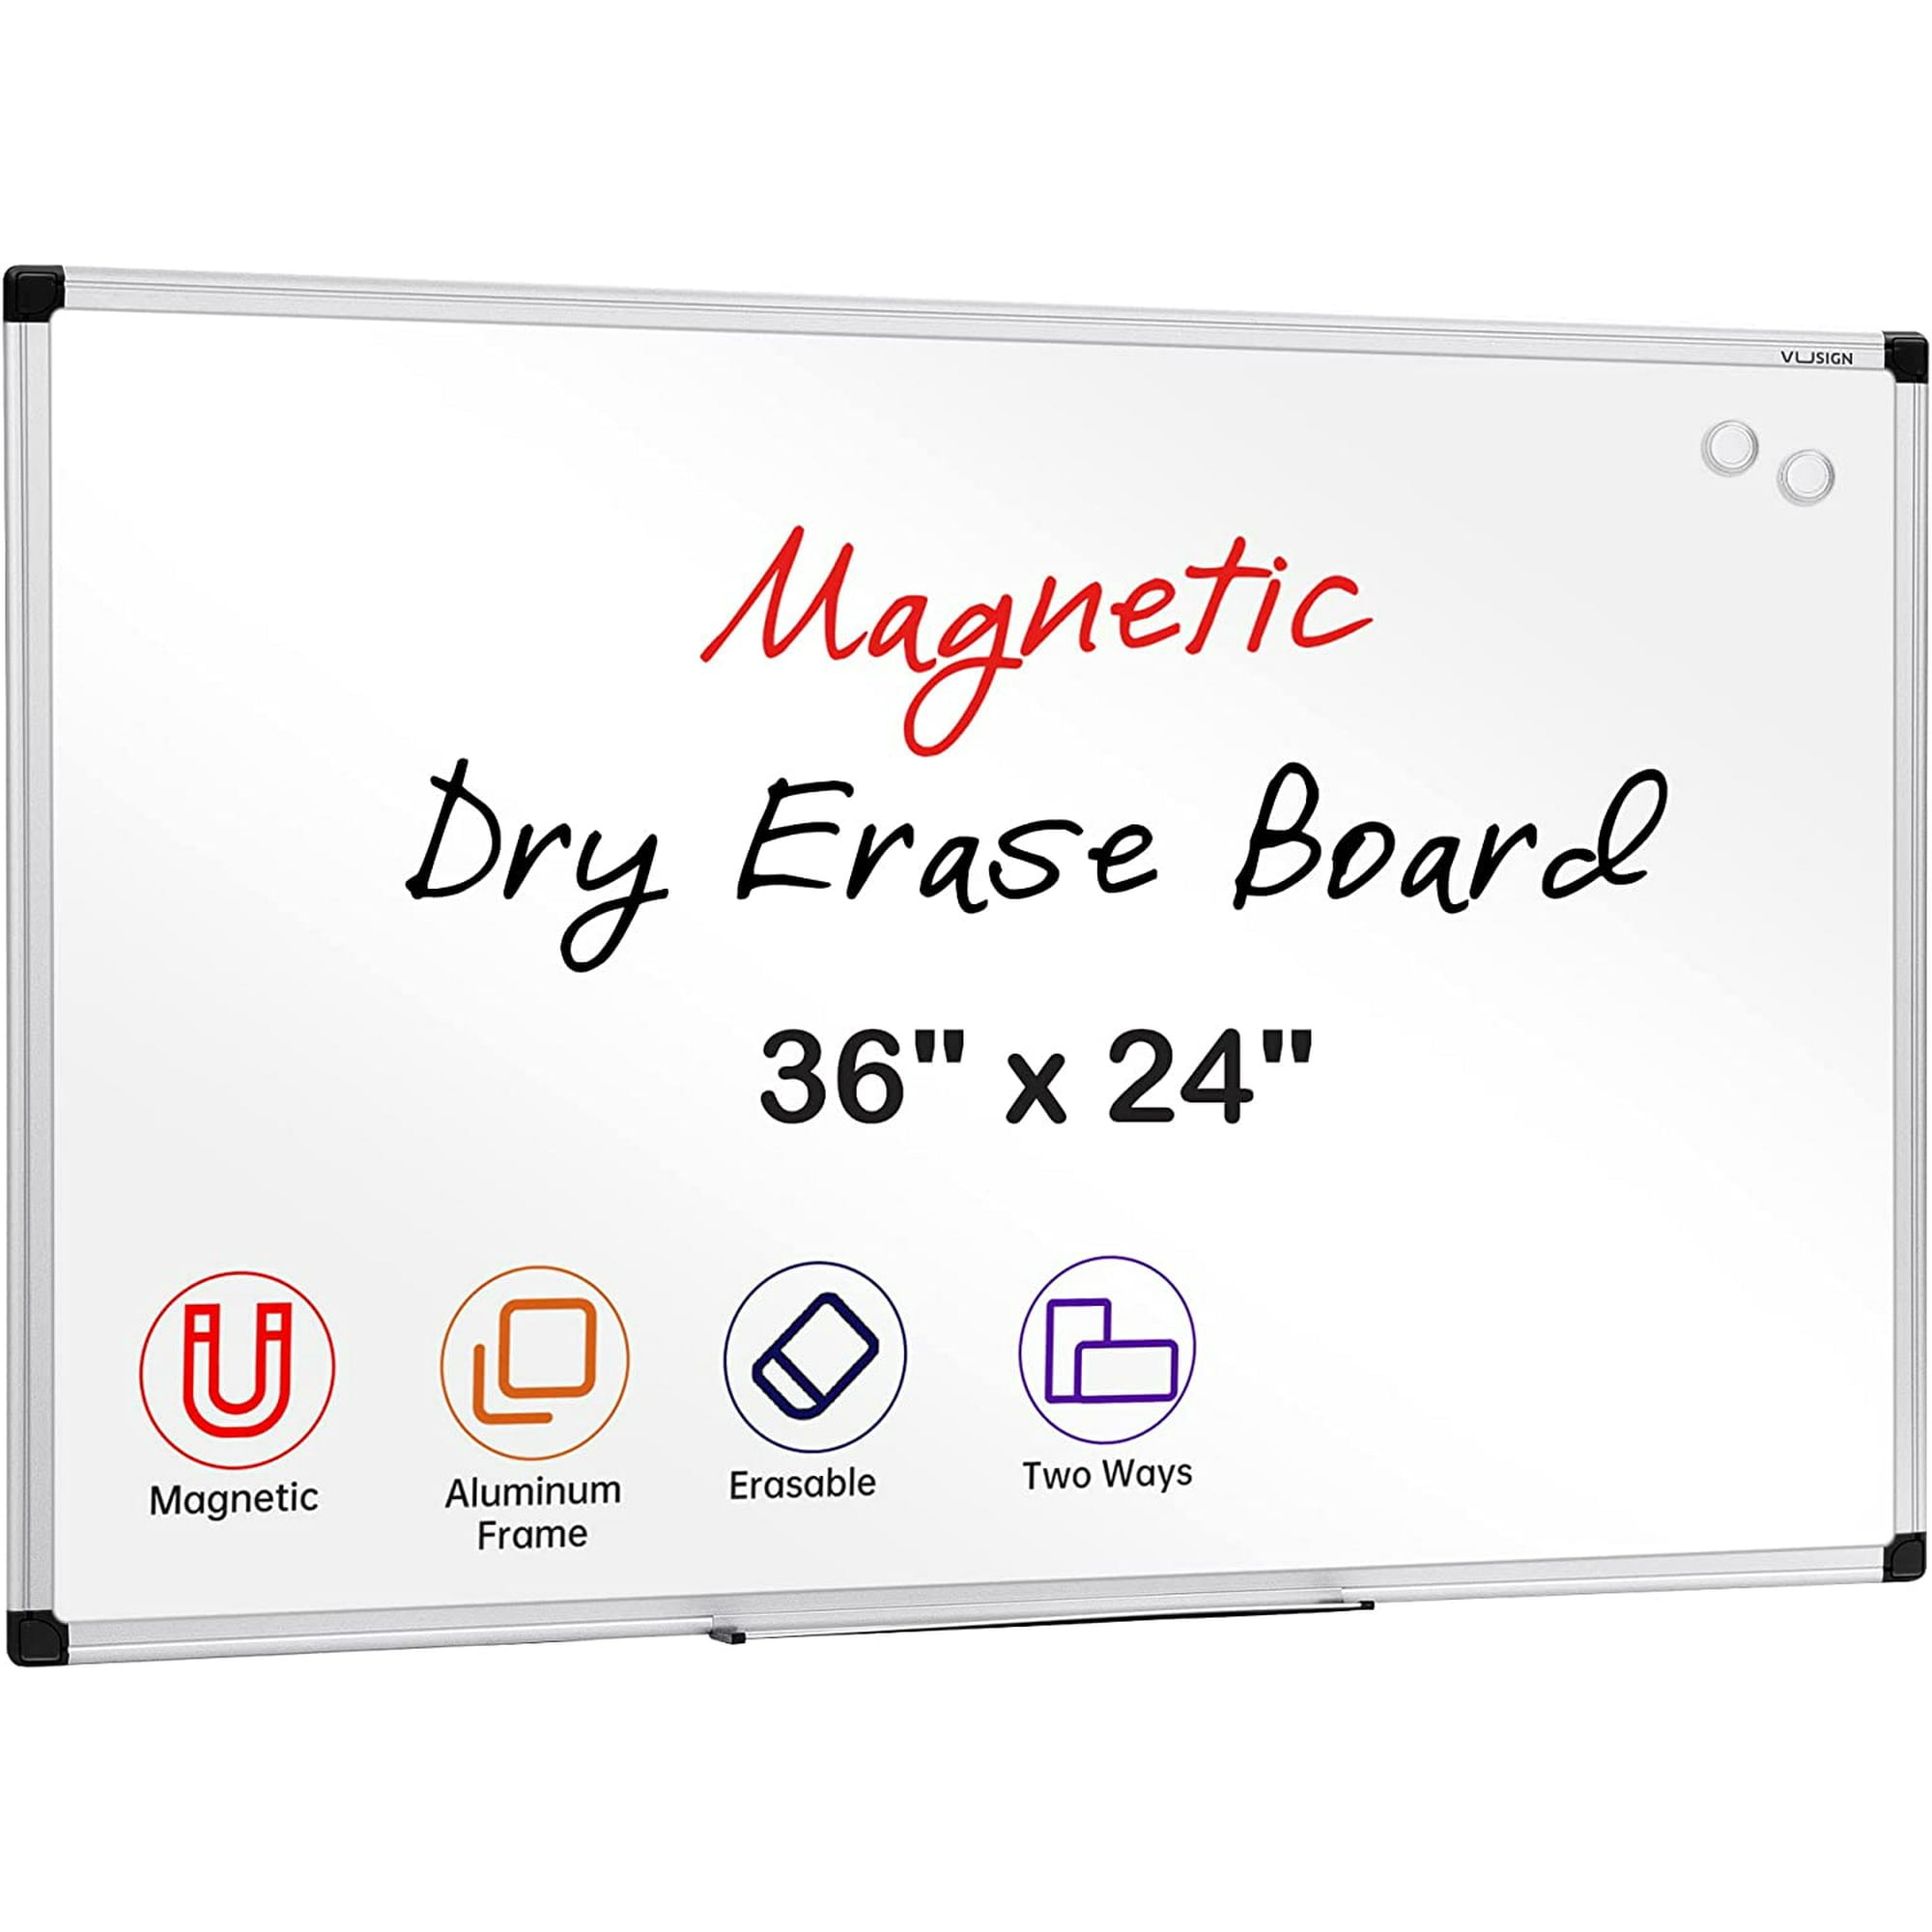   Basics Magnetic Dry Erase White Board, 36 x 48-Inch,  Aluminum Frame, Silver/White : Office Products